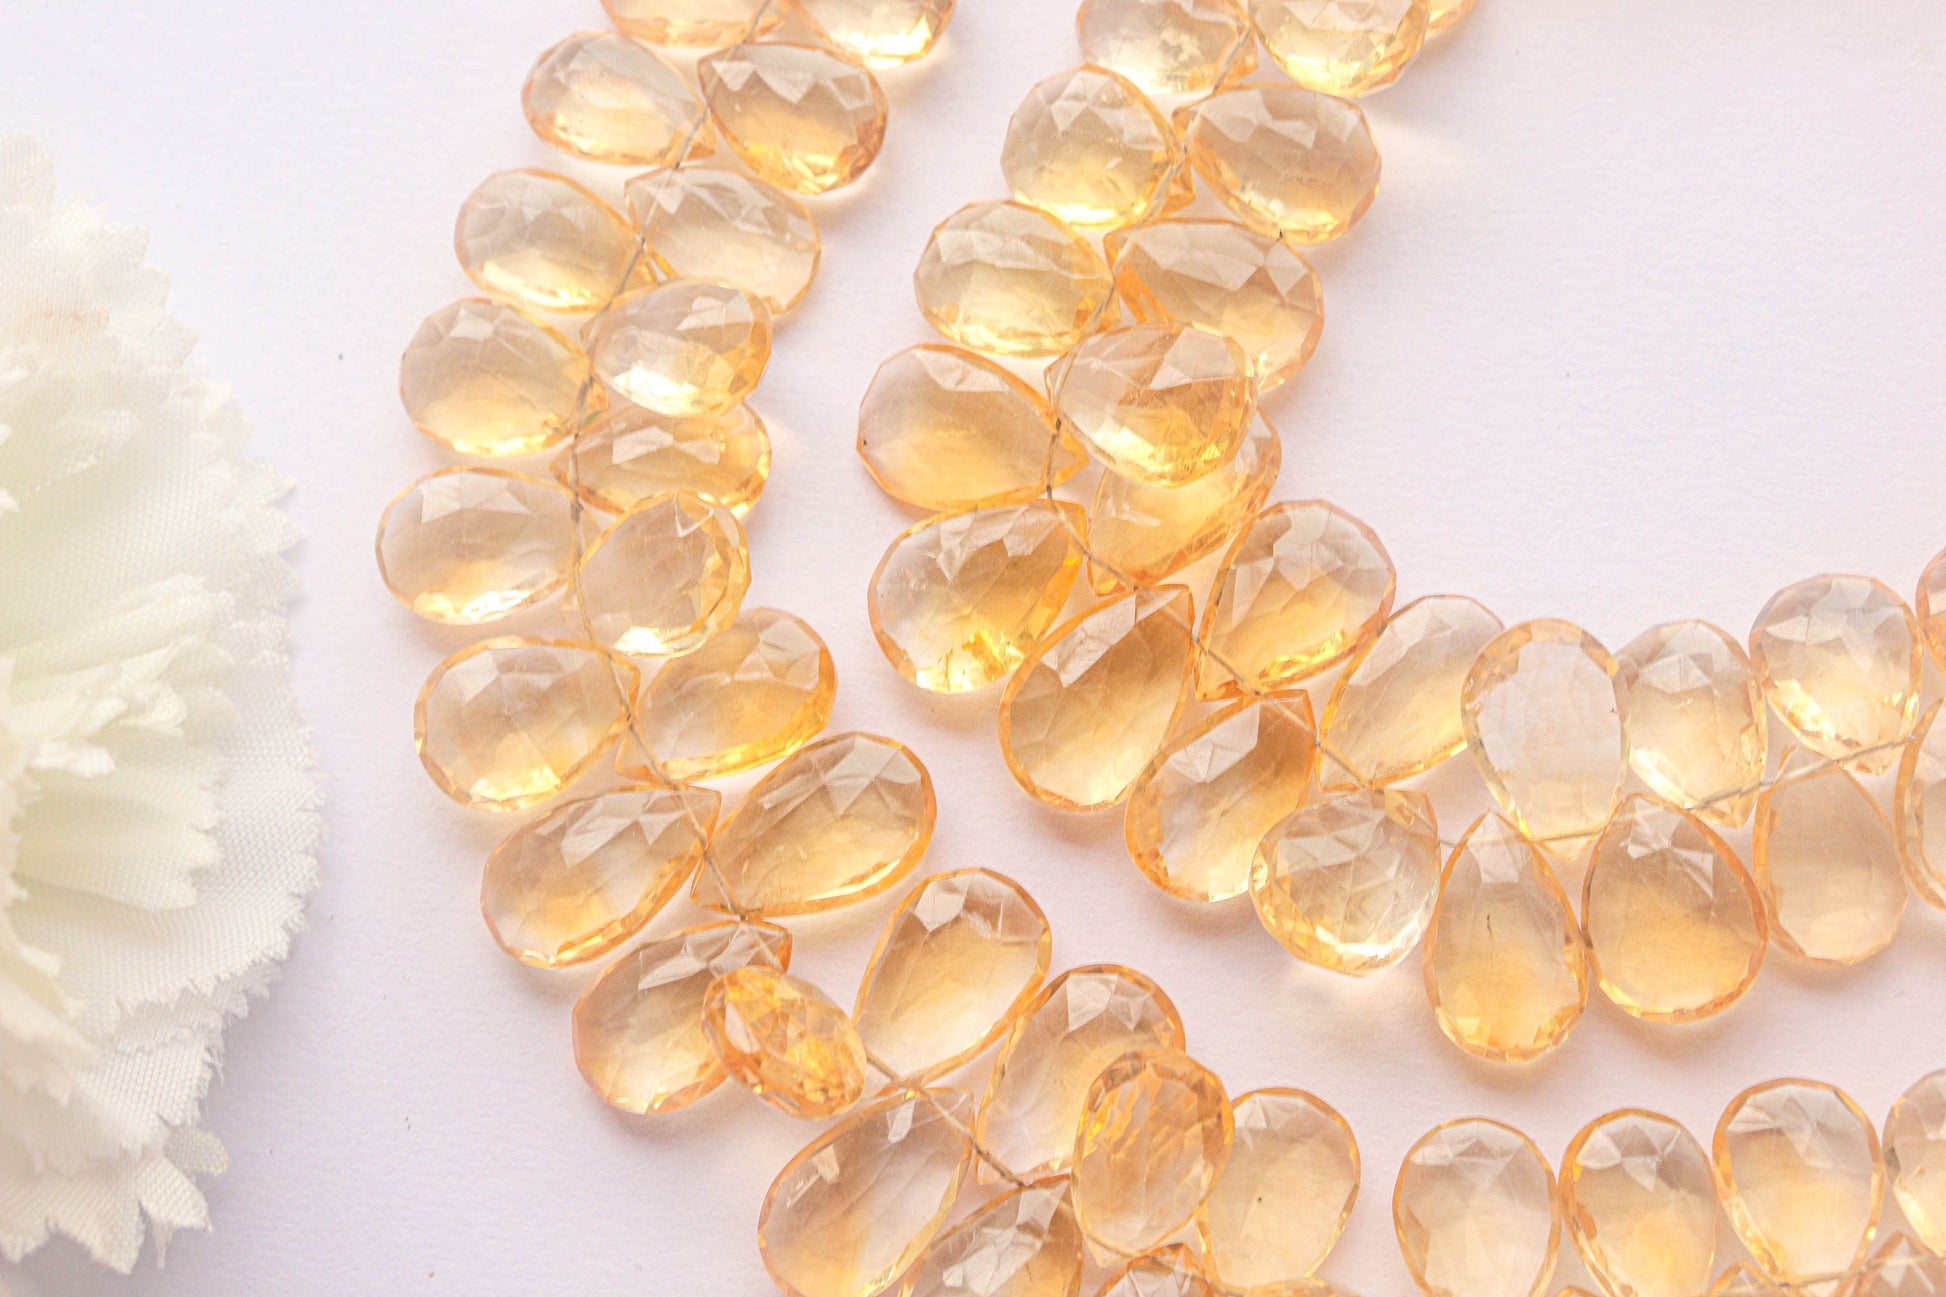 Citrine Briolette Faceted | 9x13mm | 48 Pieces Full Strand | 8 Inch | Citrine faceted pear briolette | Matching Pairs for Jewelry Beadsforyourjewelry